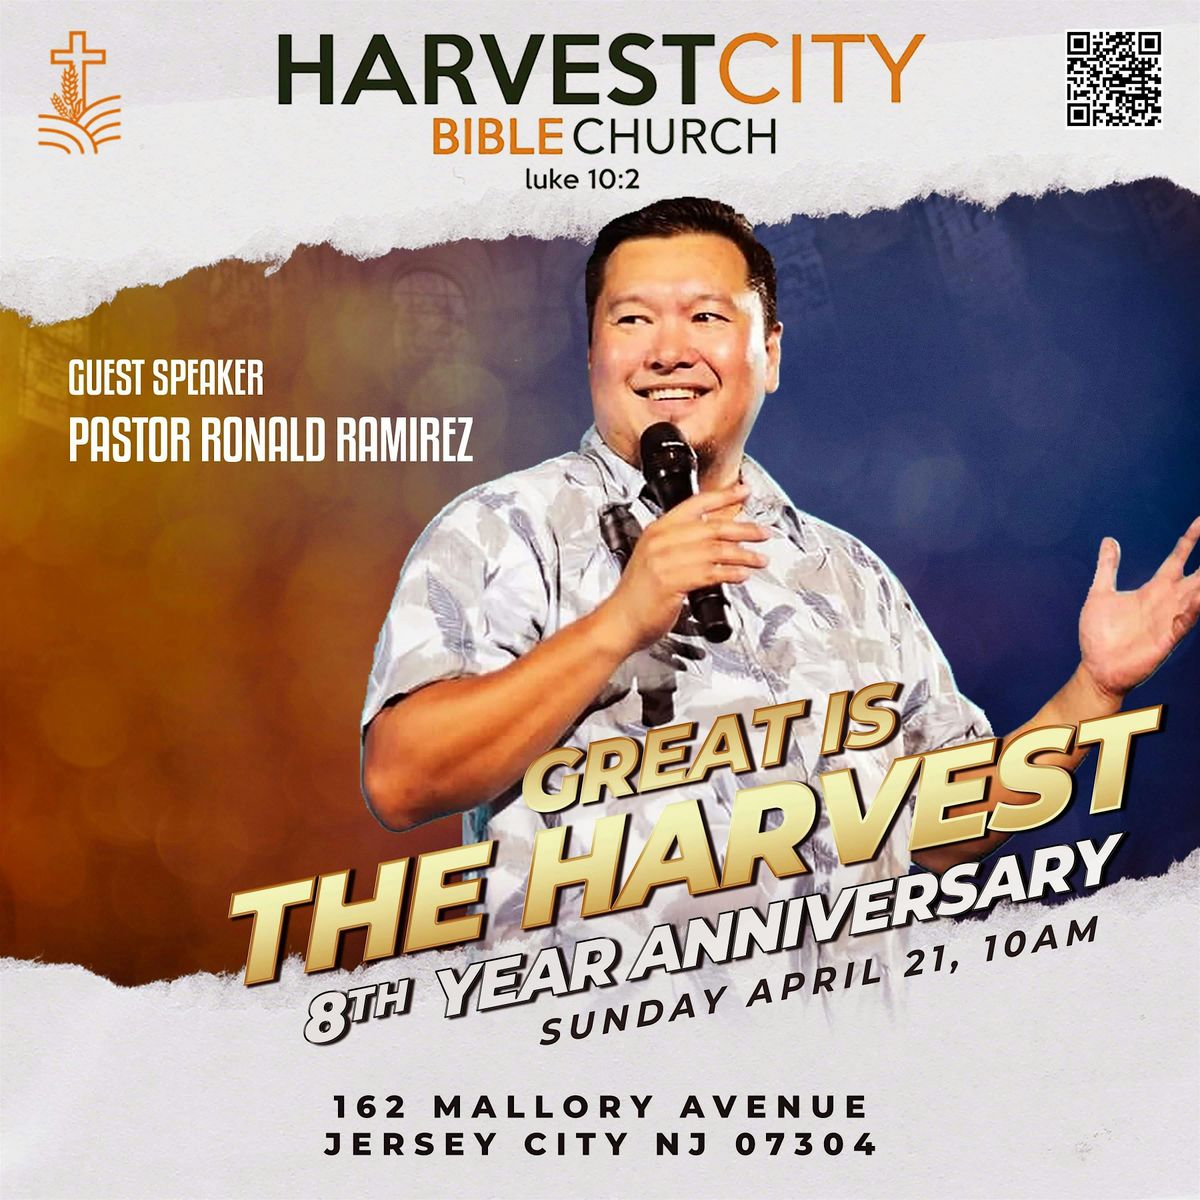 GREAT IS THE HARVEST *8TH YEAR ANNIVERSARY*